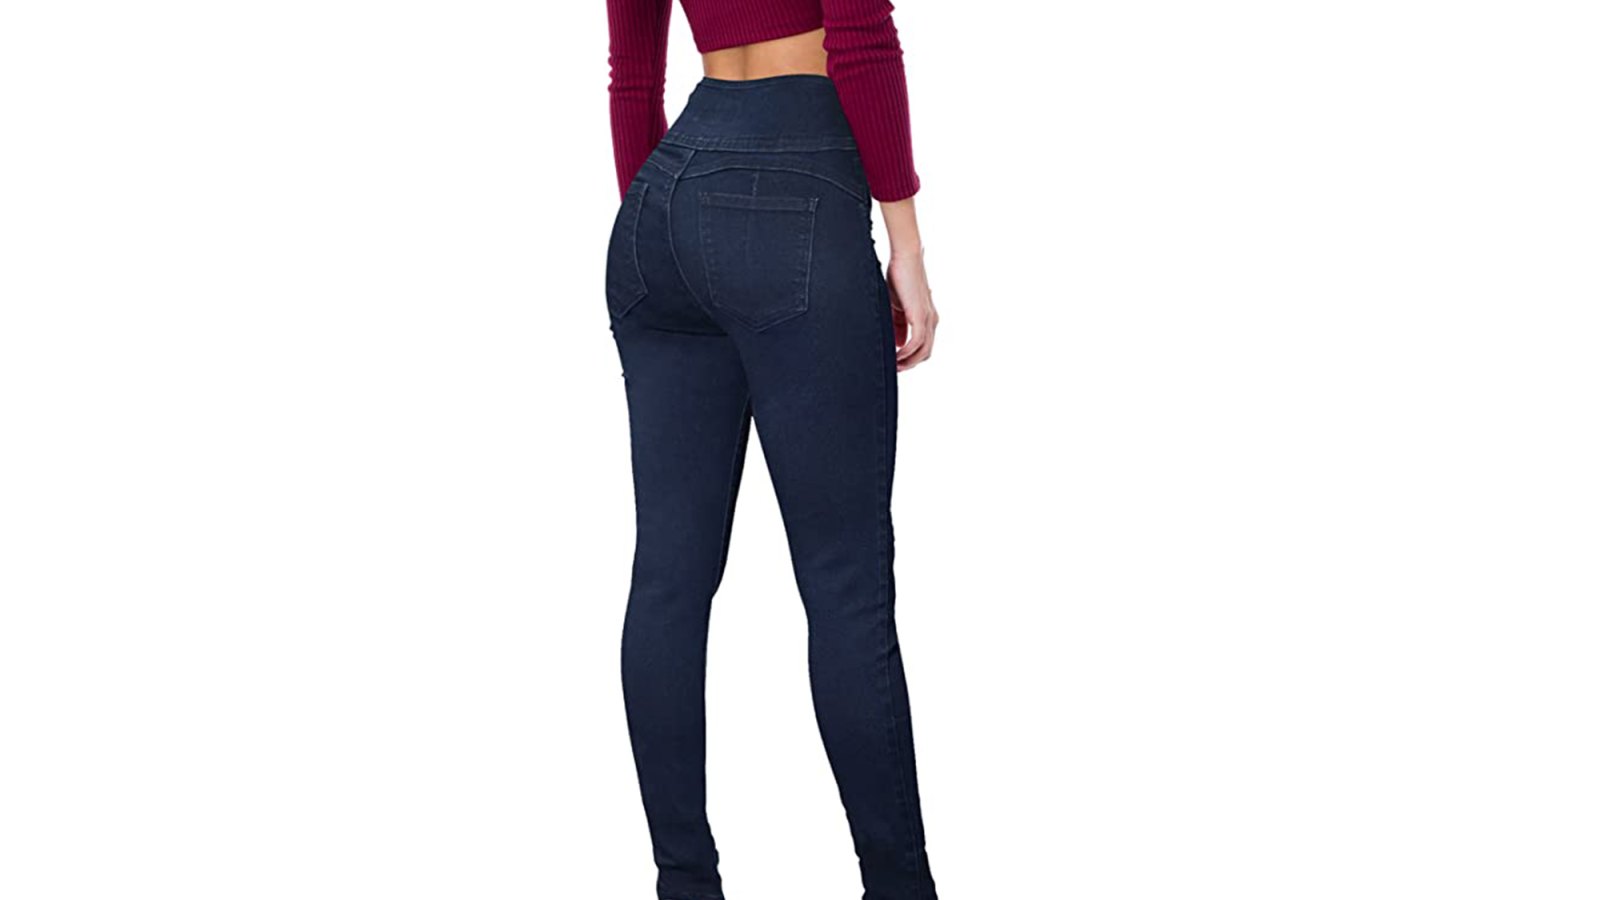 Hybrid & Butt-Lifting Jeans Are Game-Changer